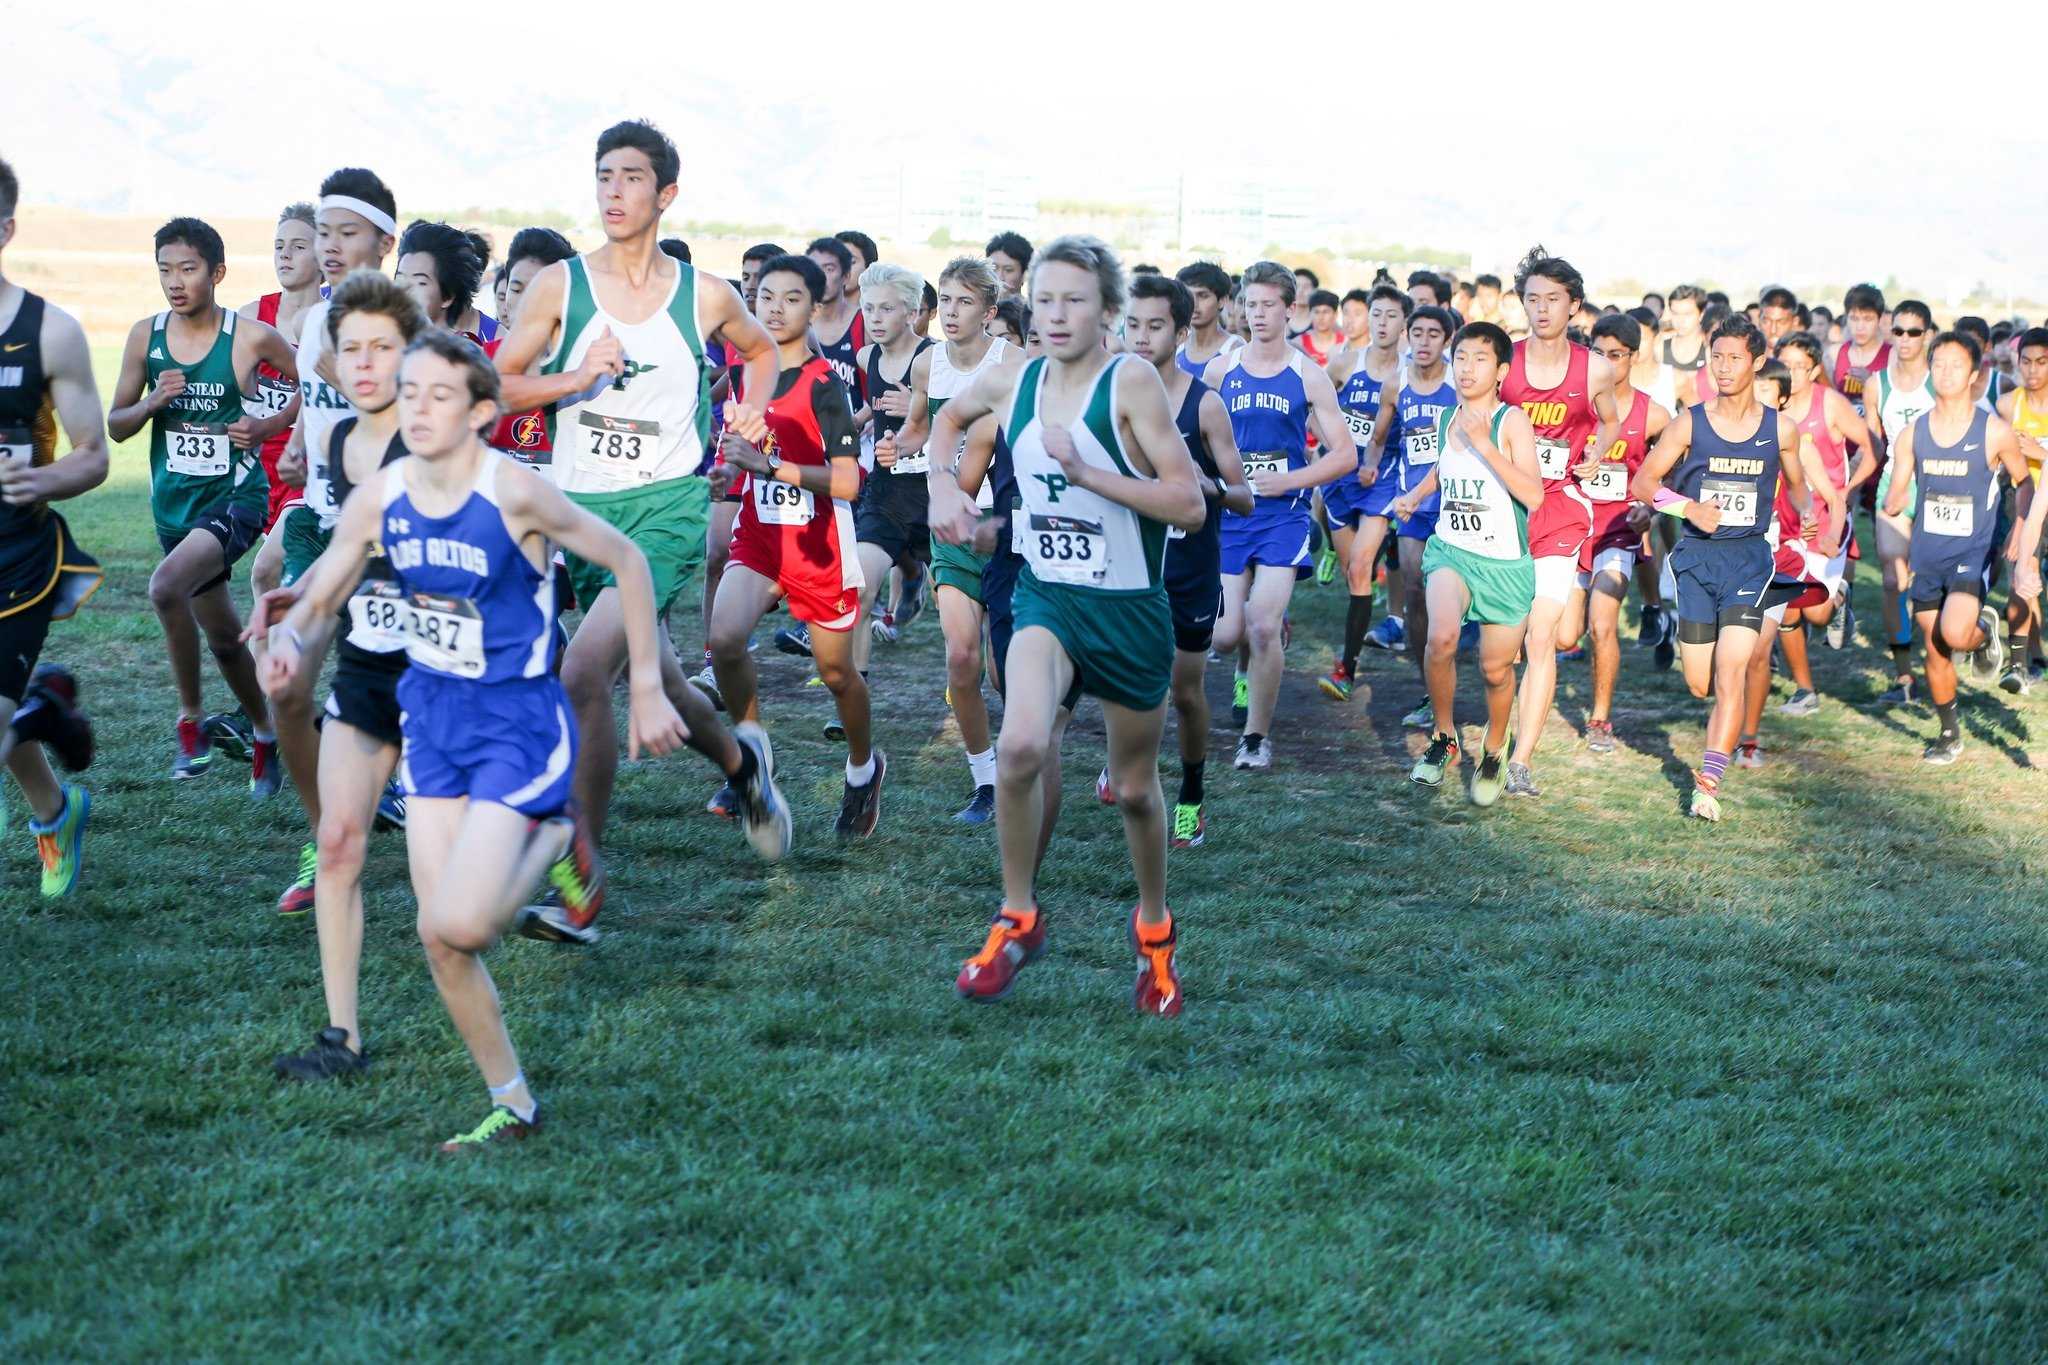 Palo Alto High School cross country team members frequently use math and science skills in order to better their performance.